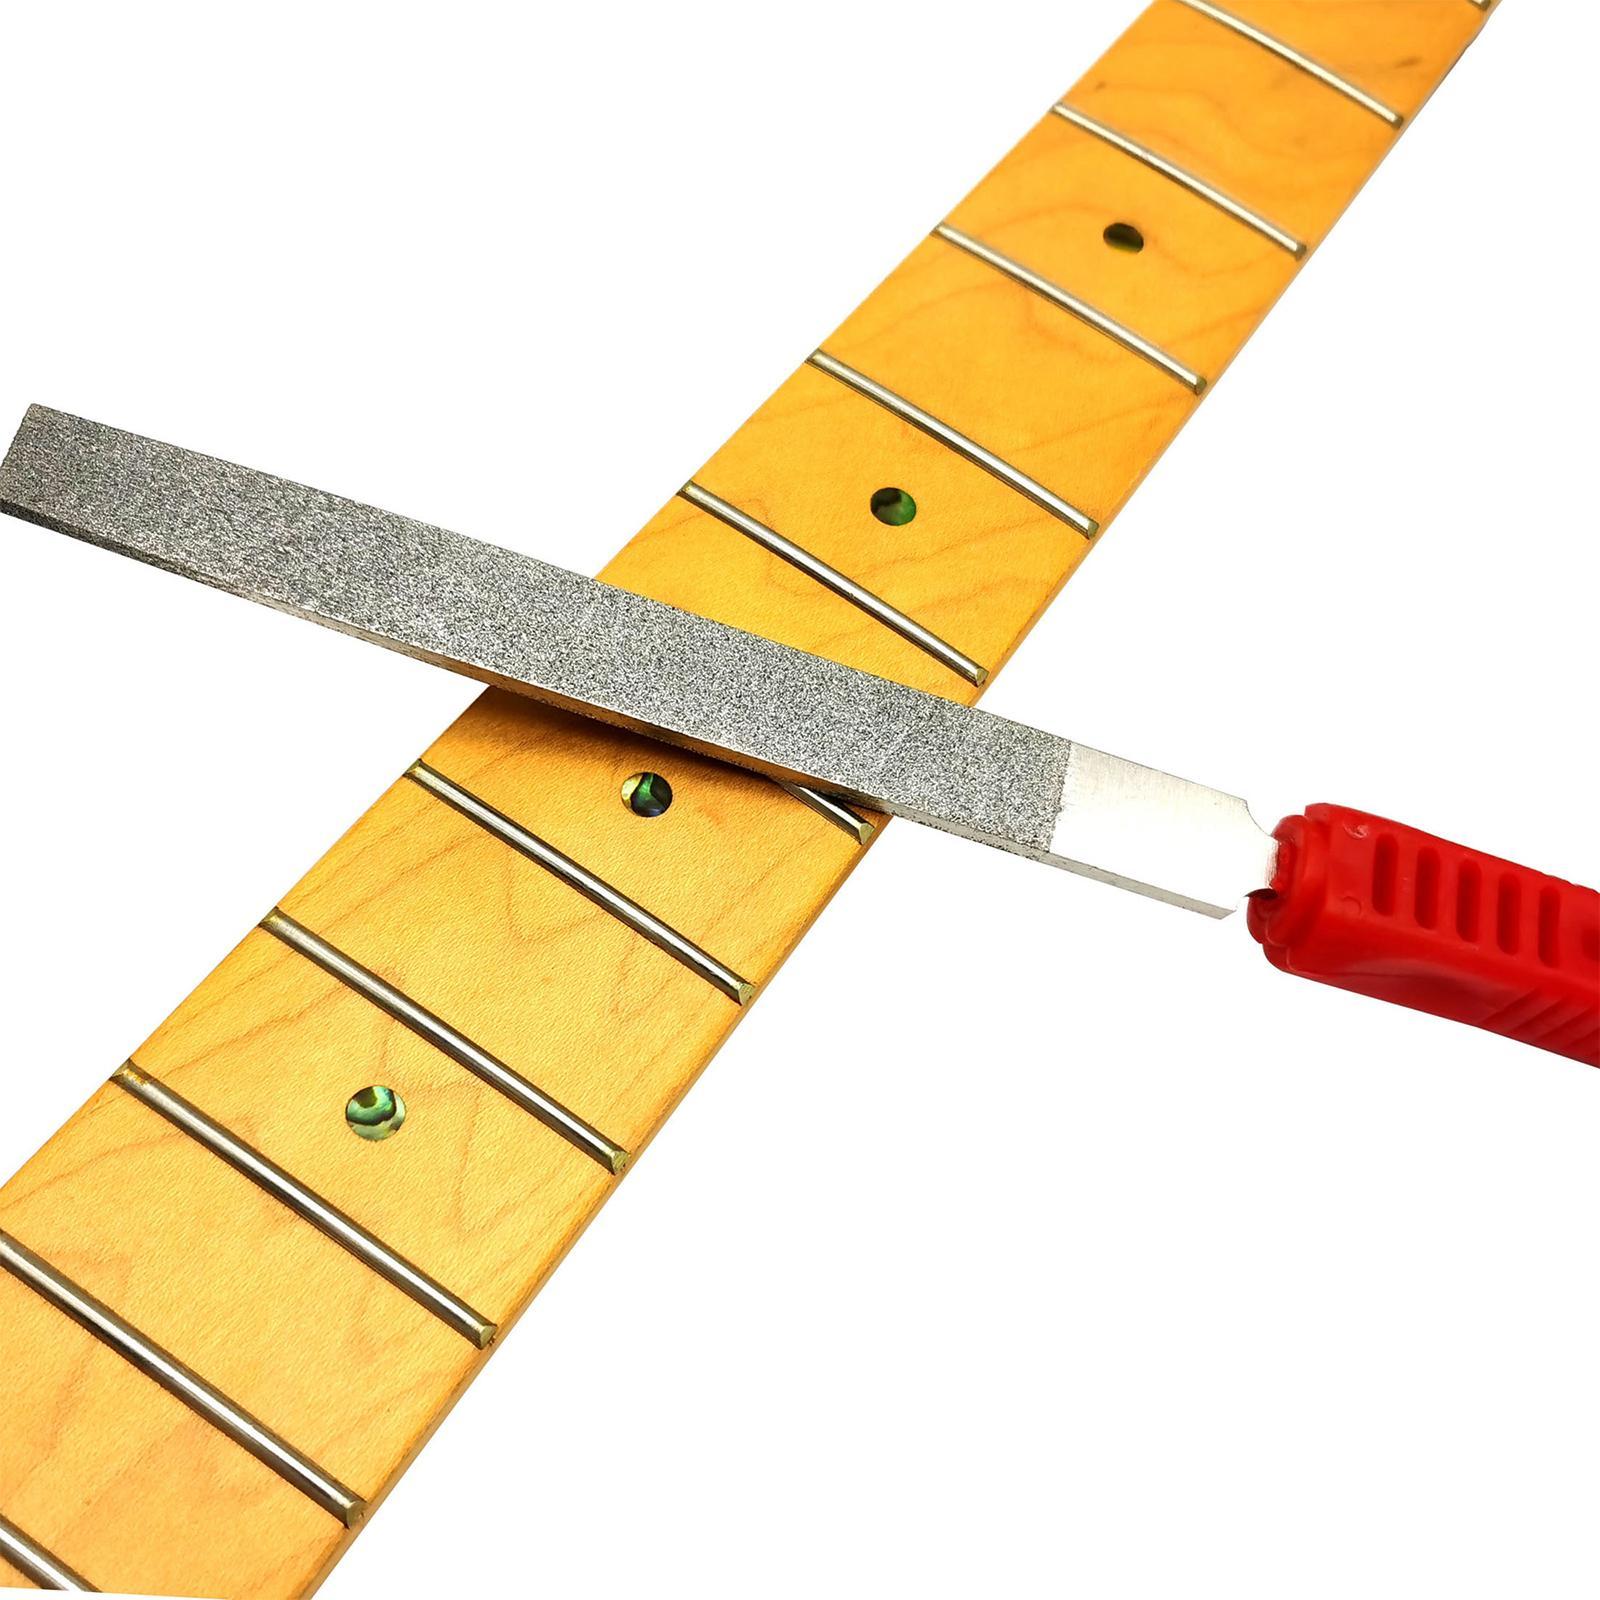 Professional Guitar Fret File Luthier Tools Fingerboard Protectors